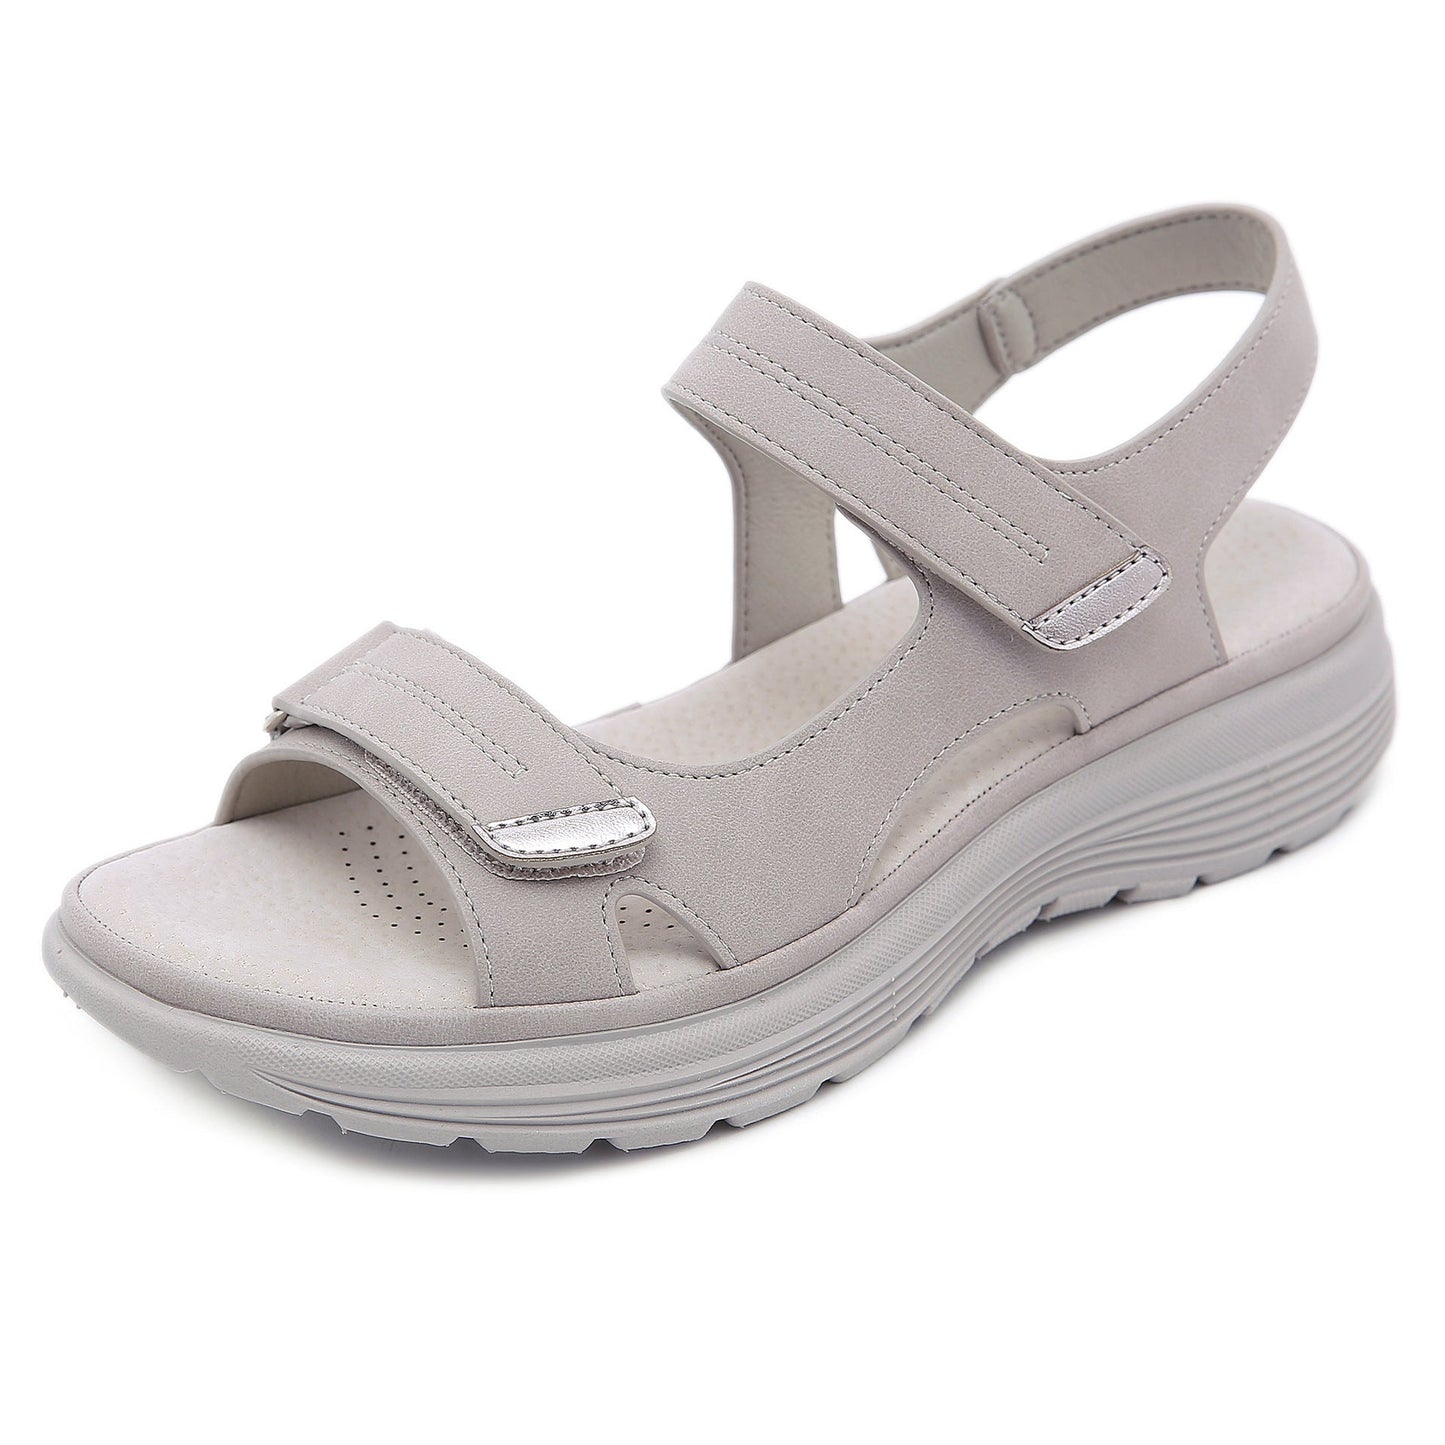 Comfortable Sandals Ladies Slip-on Wedge Sandals Sports Beach Walk Shoes Summer Fashion Casual Shoes - Boots BootiesShoescute orthopedic sandalsFlat Sandalsladies sandals